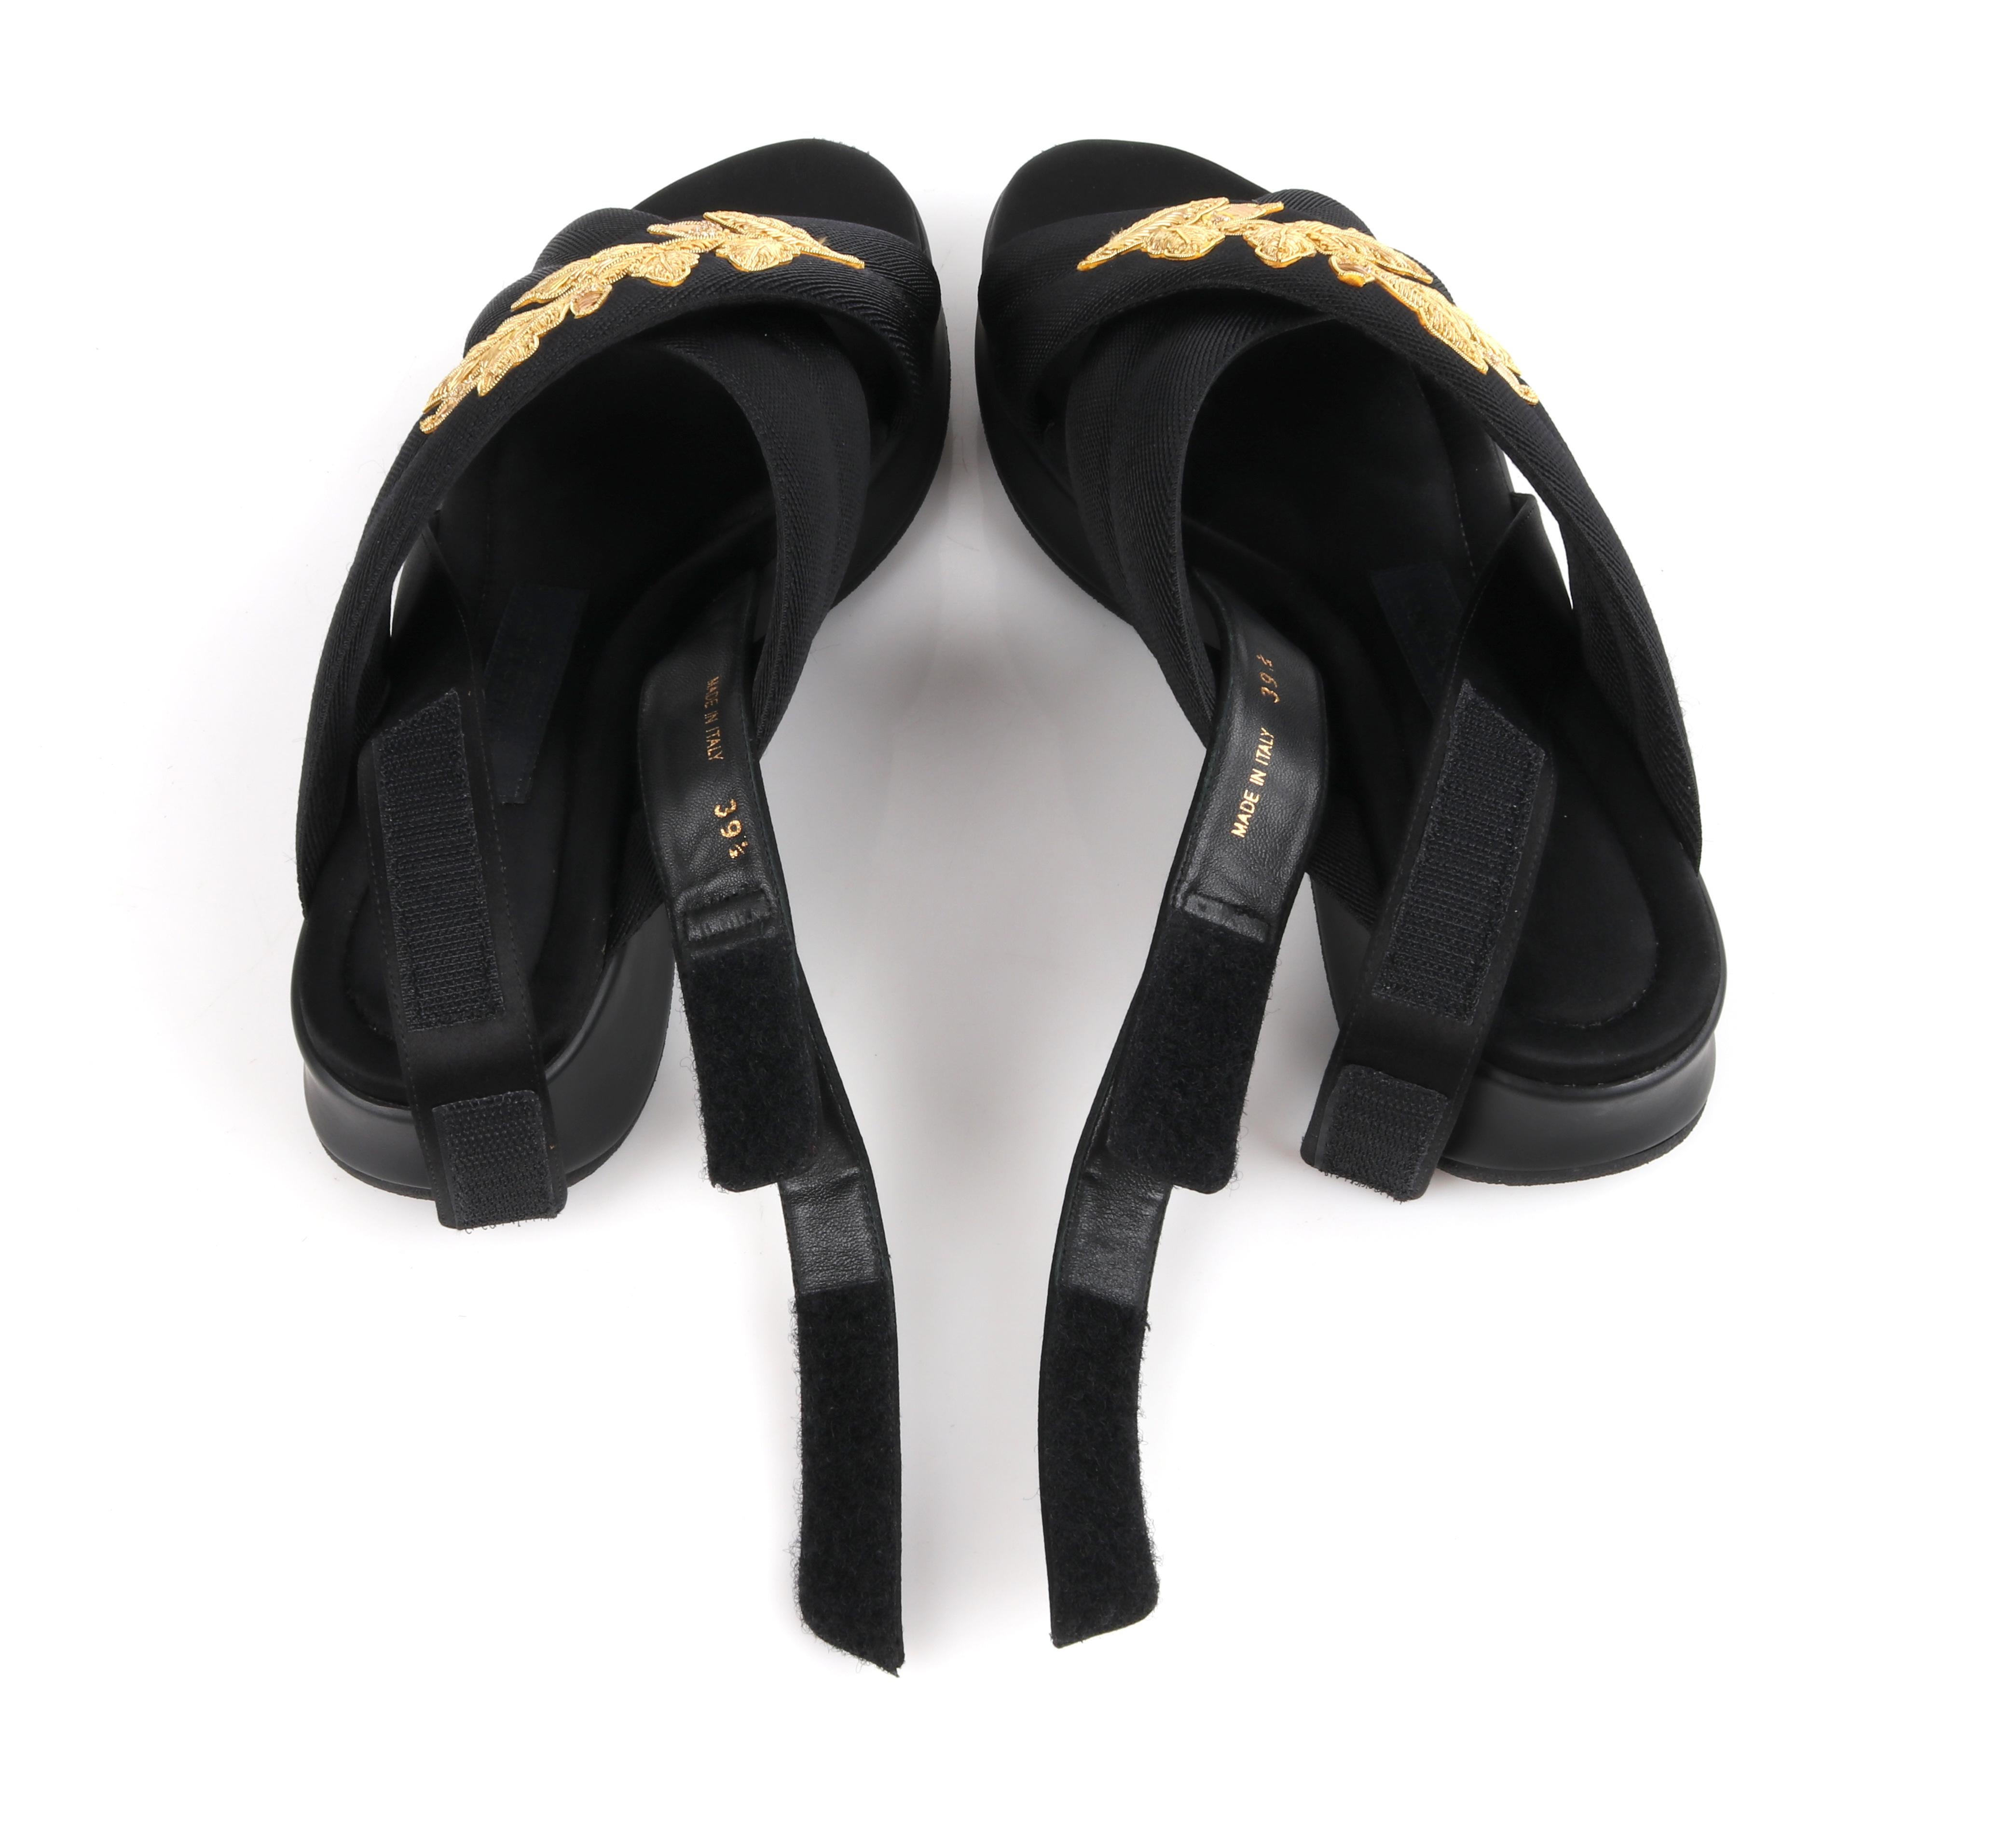 BURBERRY Prorsum S/S 2016 Criss Cross Embroidered Black Gold Adjustable Sandals  For Sale 5